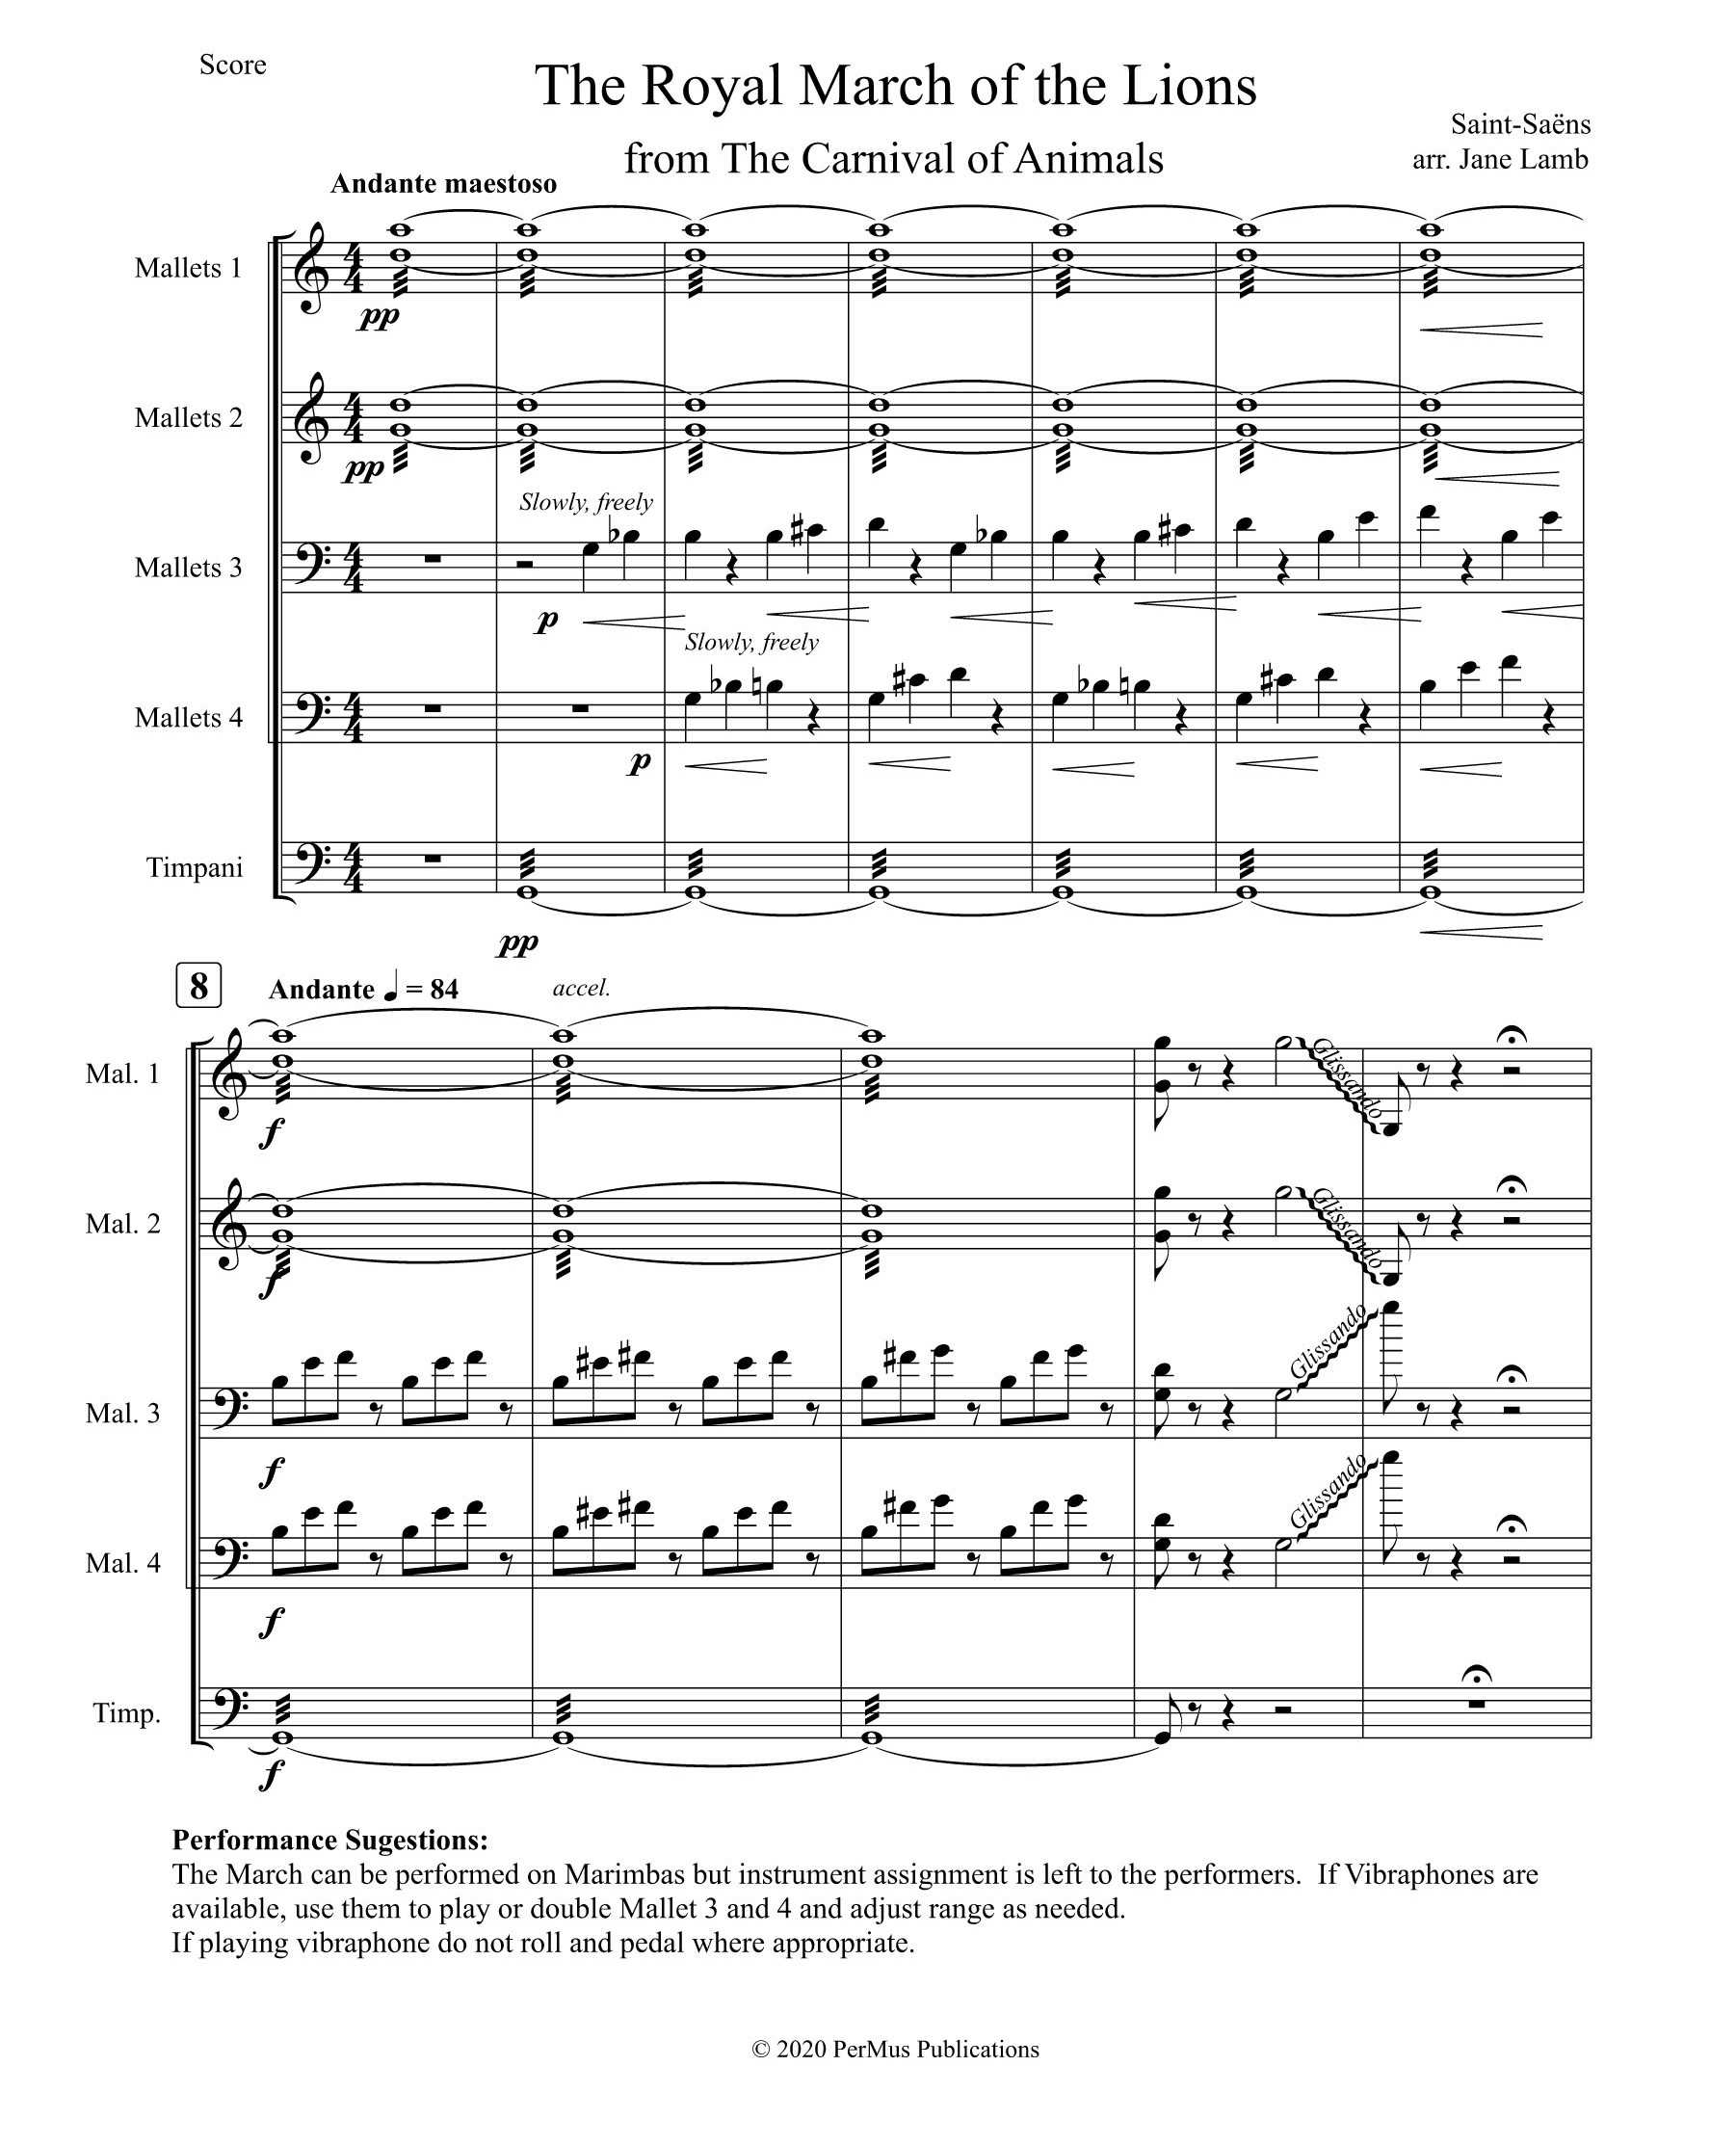 Royal March of the Lions from Carnival of Animals by Saint-Saens arr. Jane Lamb